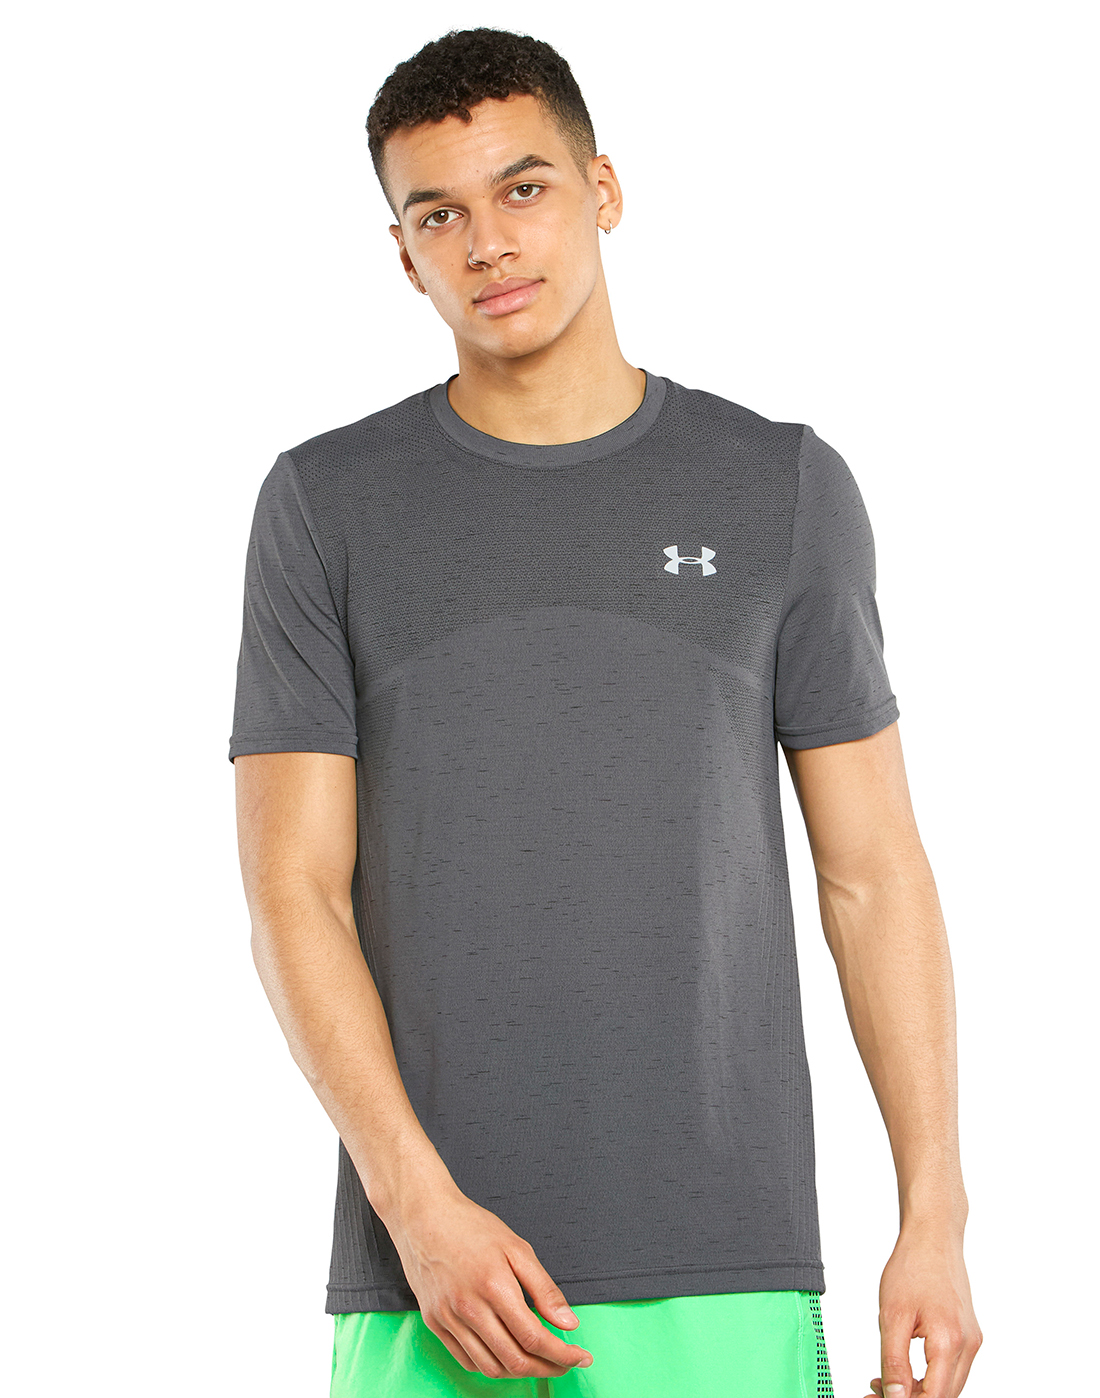 Under Armour Mens Seamless T-shirt - Grey | Life Style Sports IE